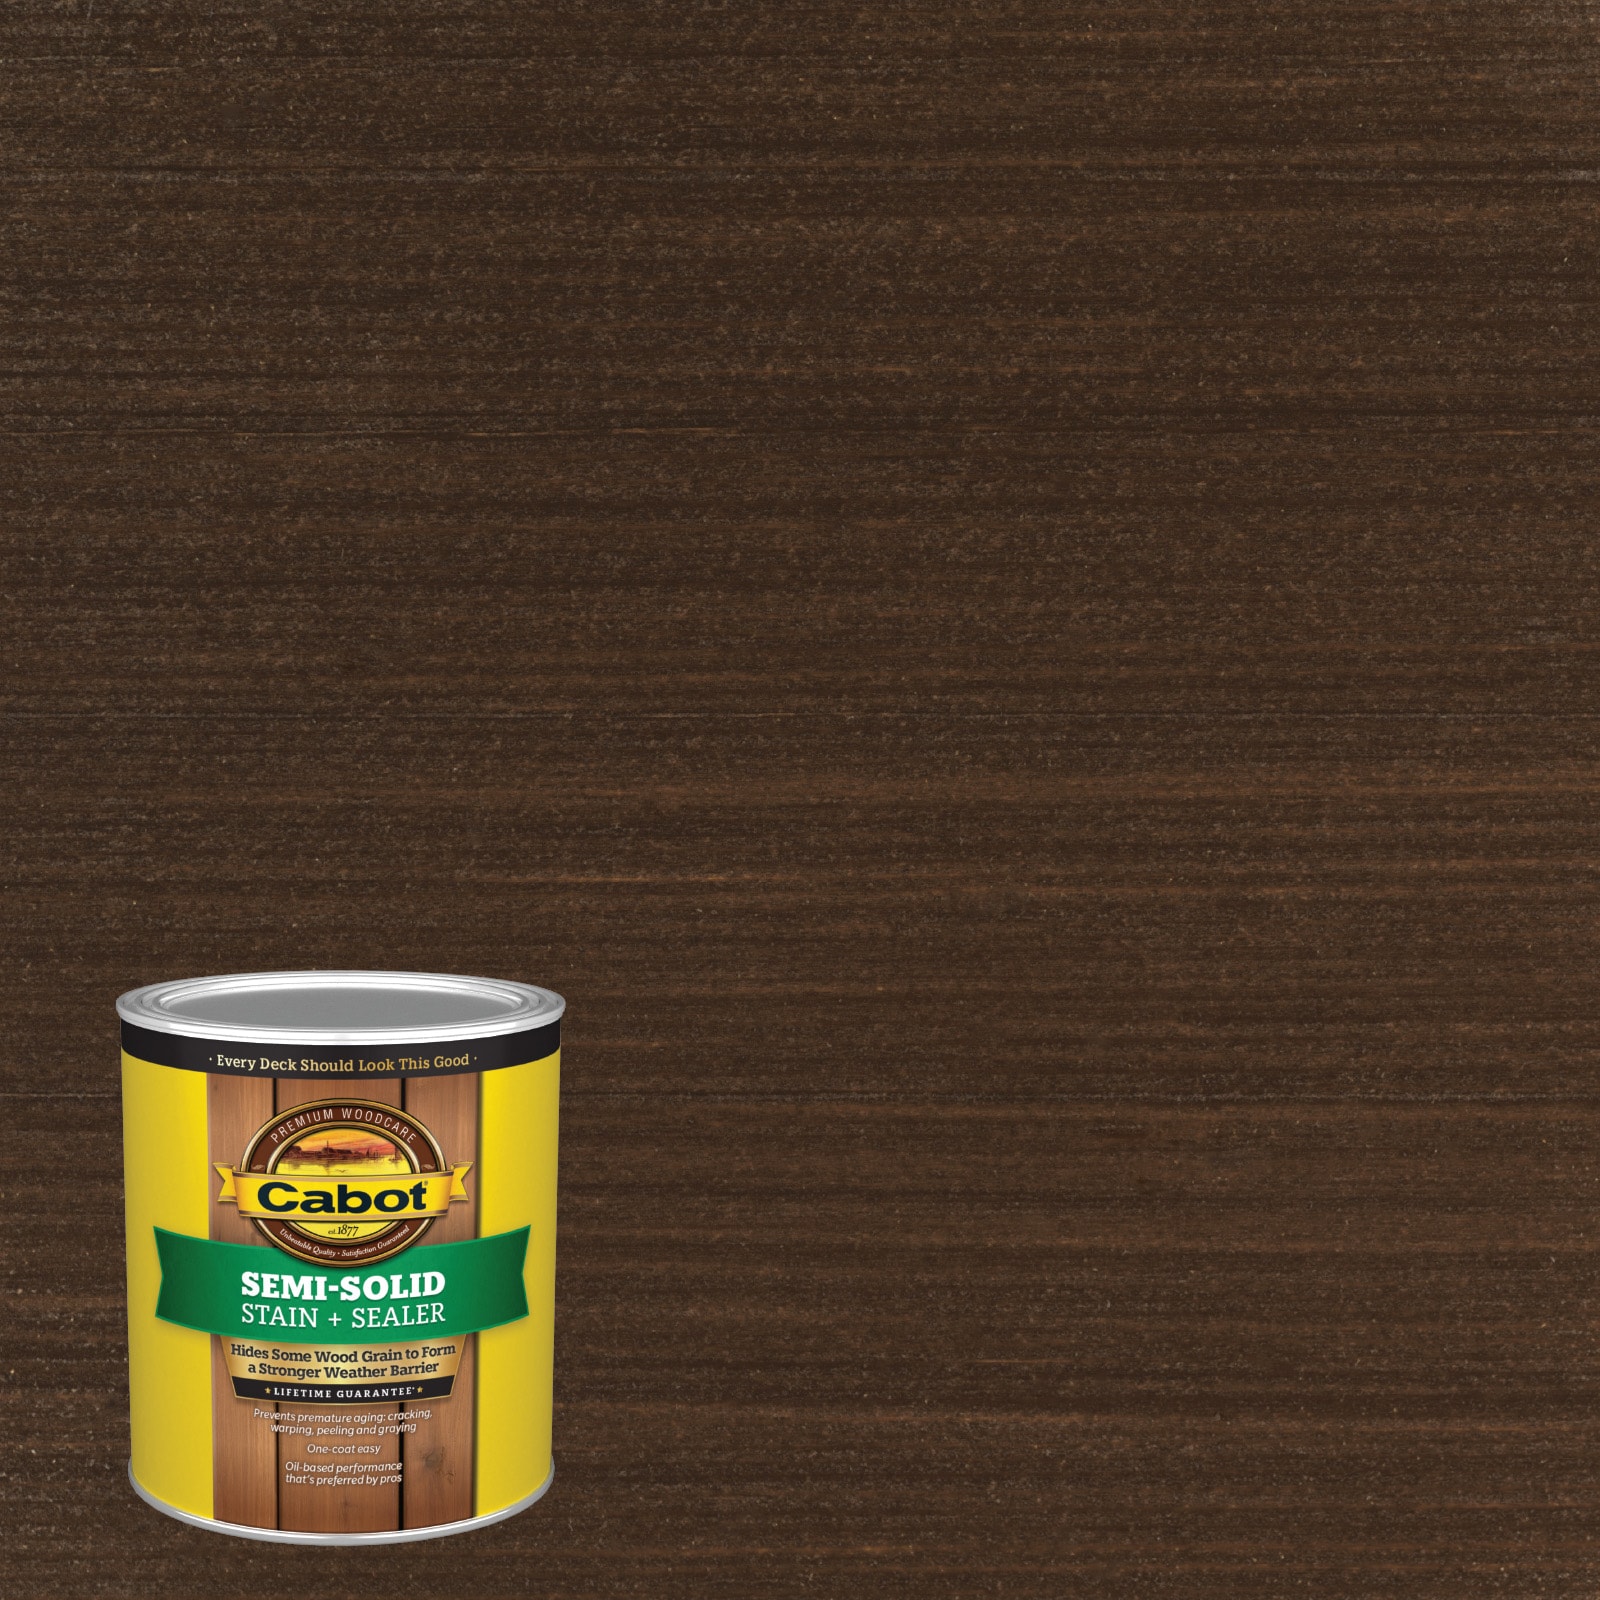 Cabot Cordovan Leather Semi-solid Exterior Wood Stain and Sealer